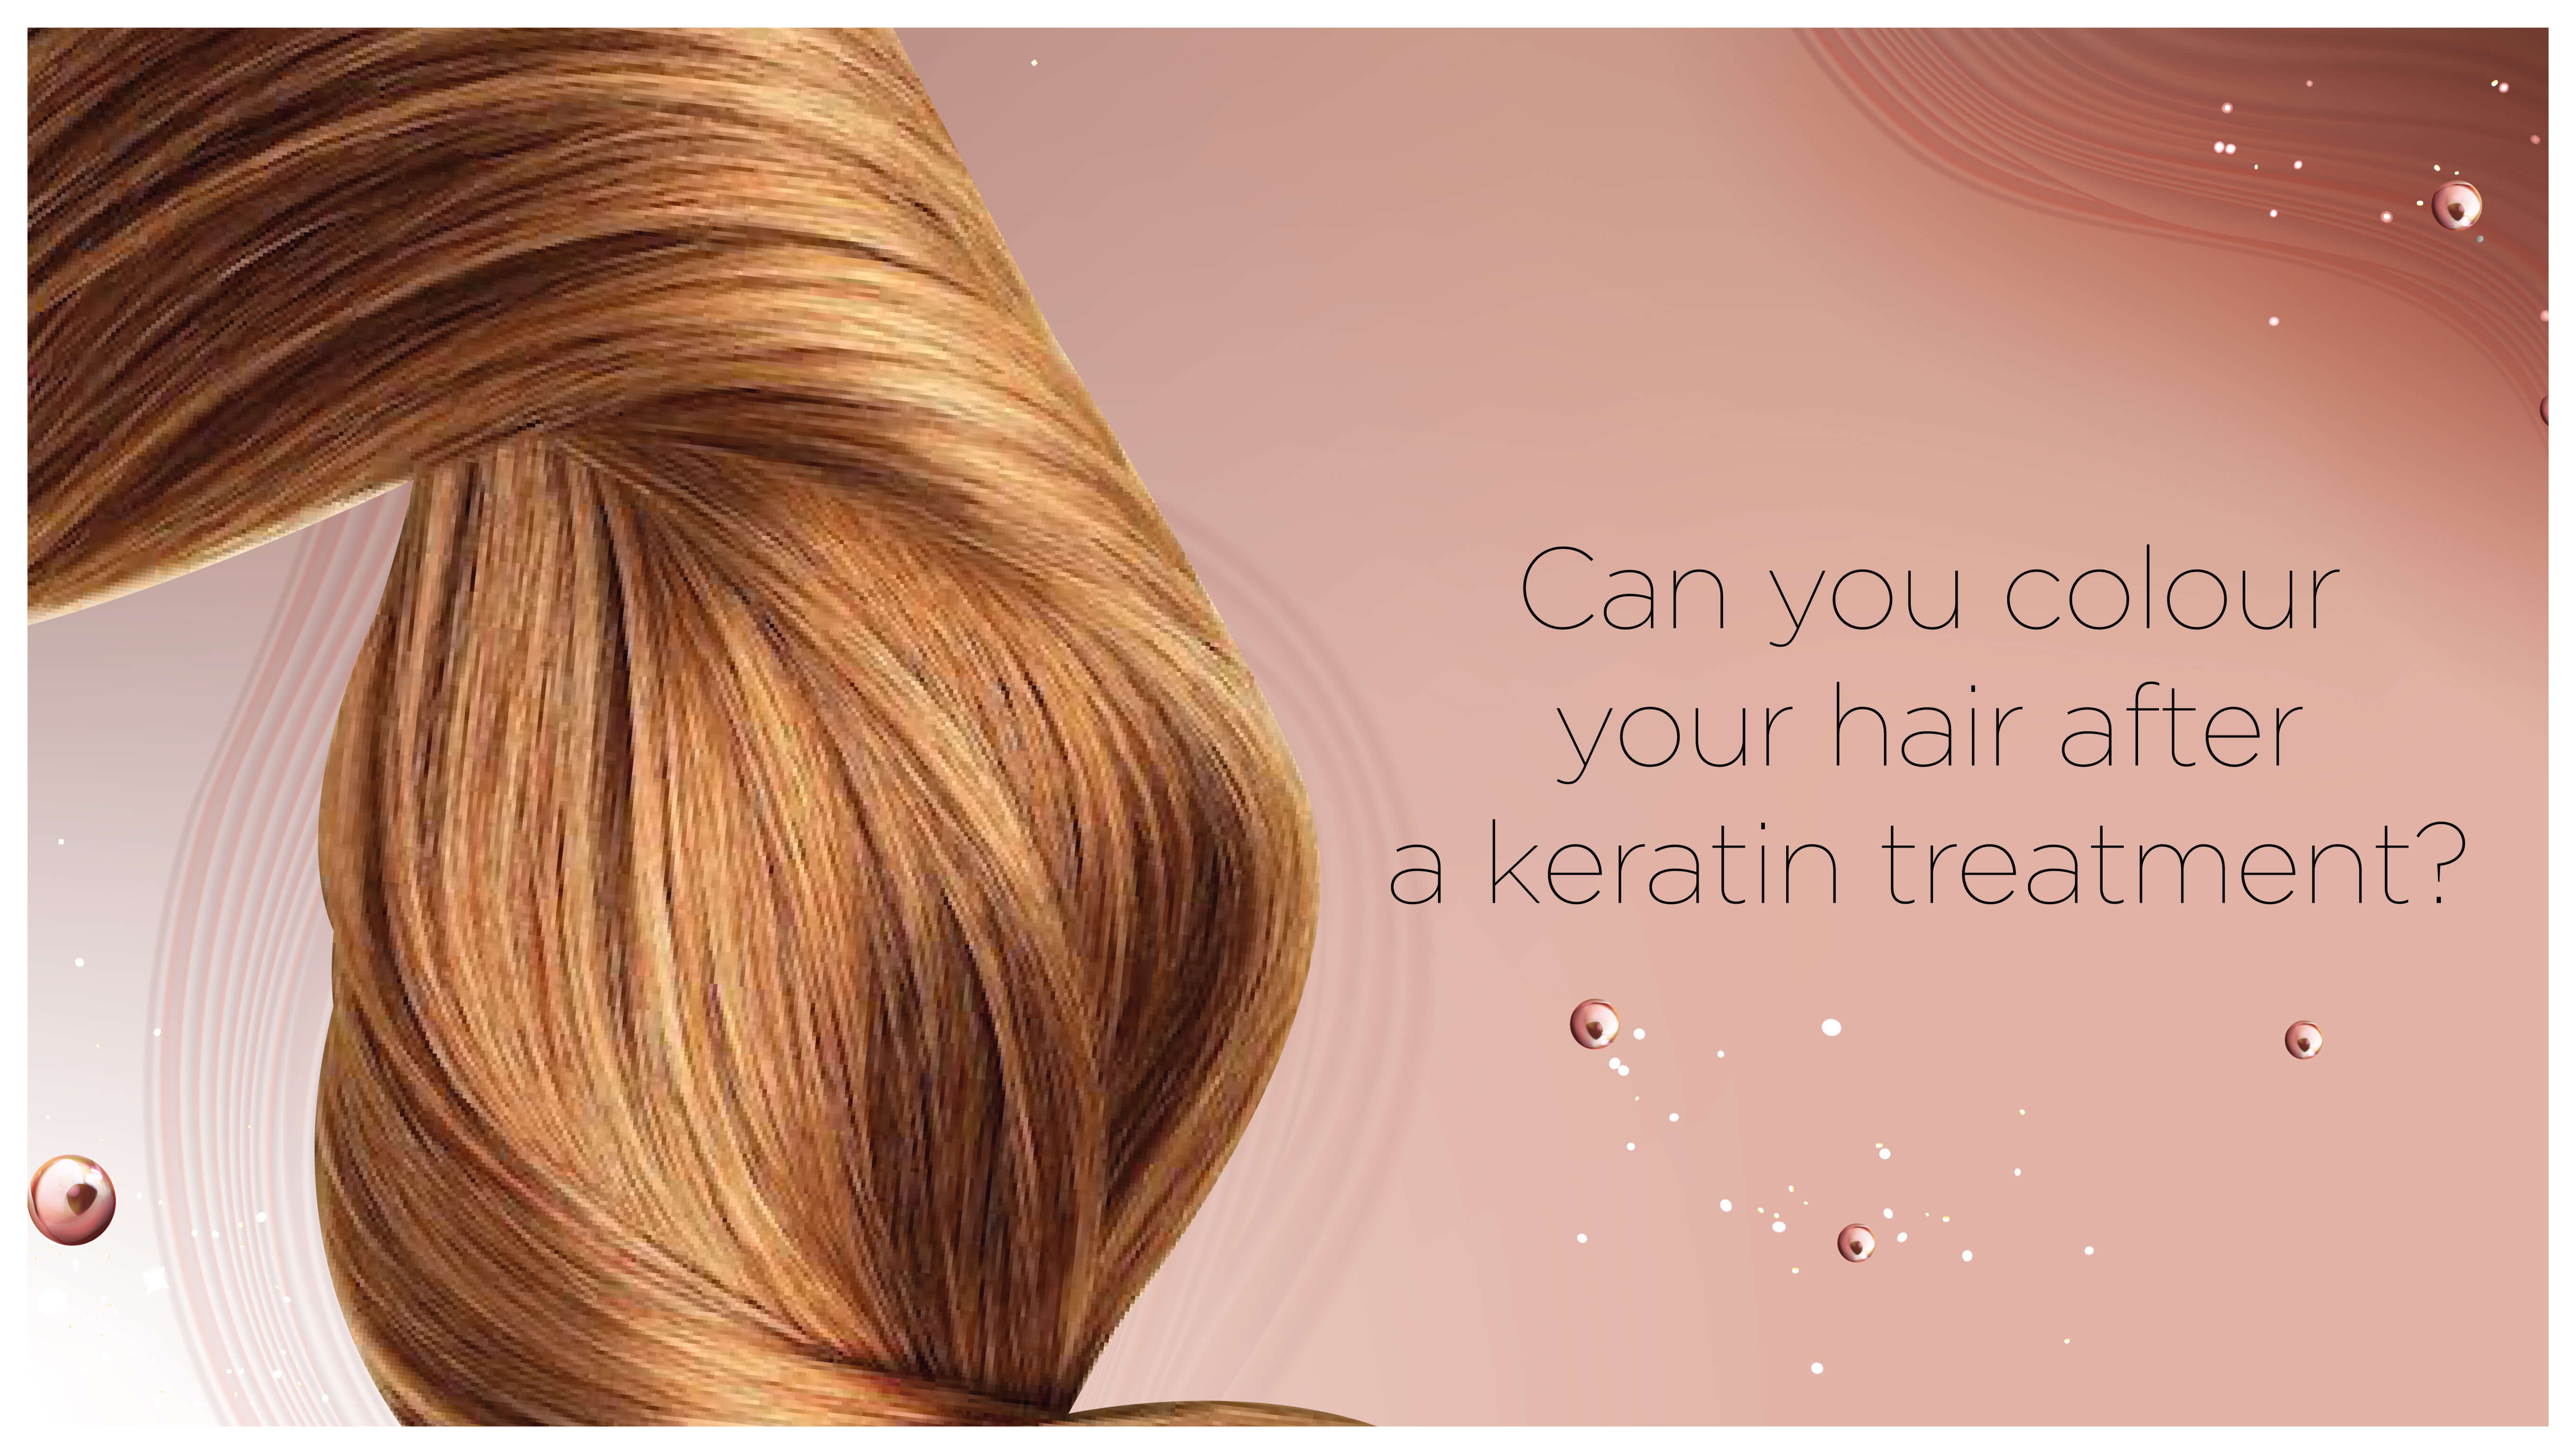 How Soon Can You Colour Your Hair After Getting A Keratin Treatment?